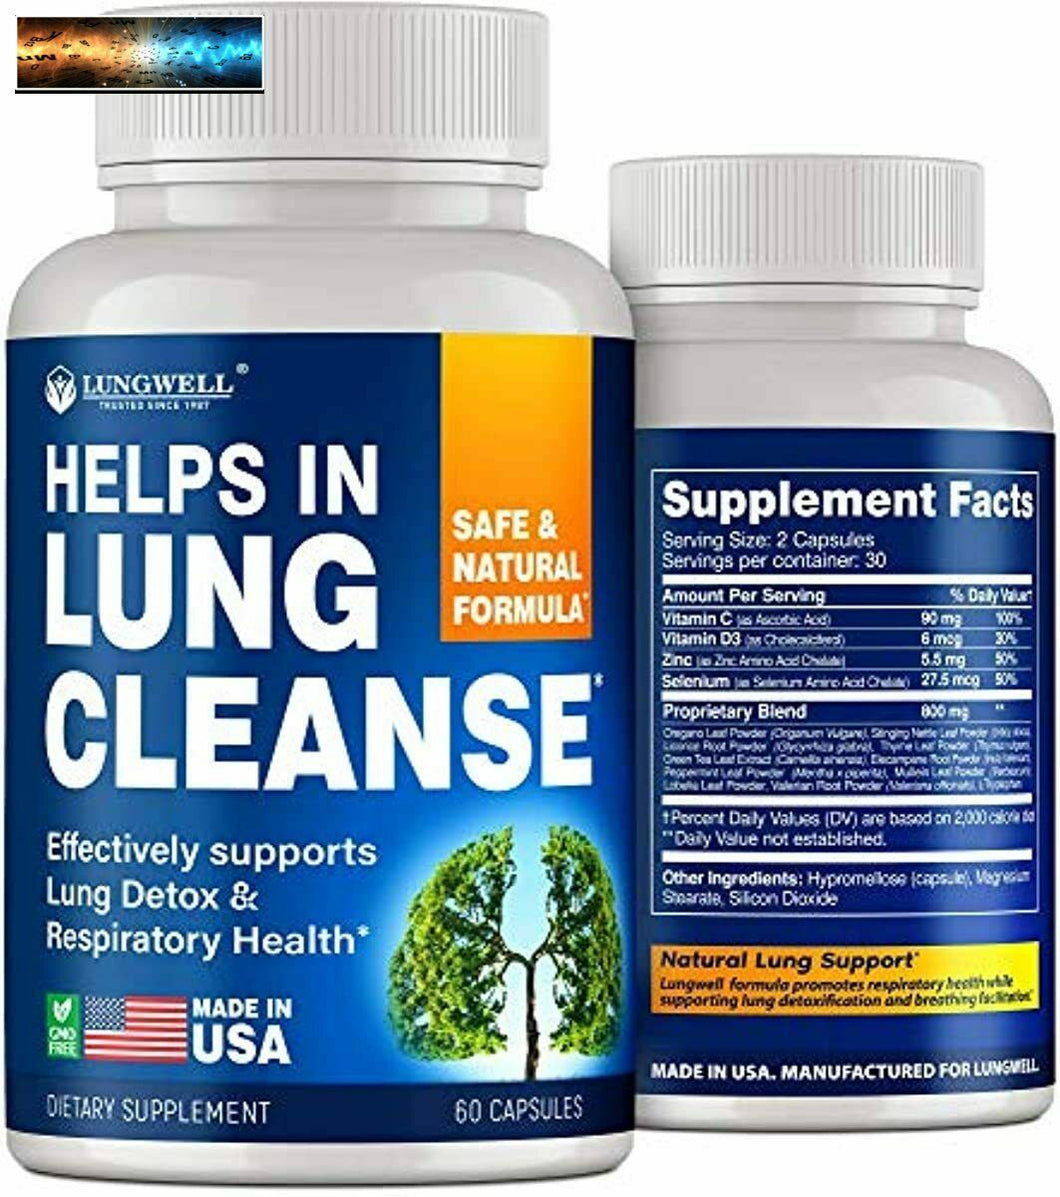 Quit Smoking Aid - Lung Cleanse & Detox Pills - Made in USA - Helps to Clear Lun